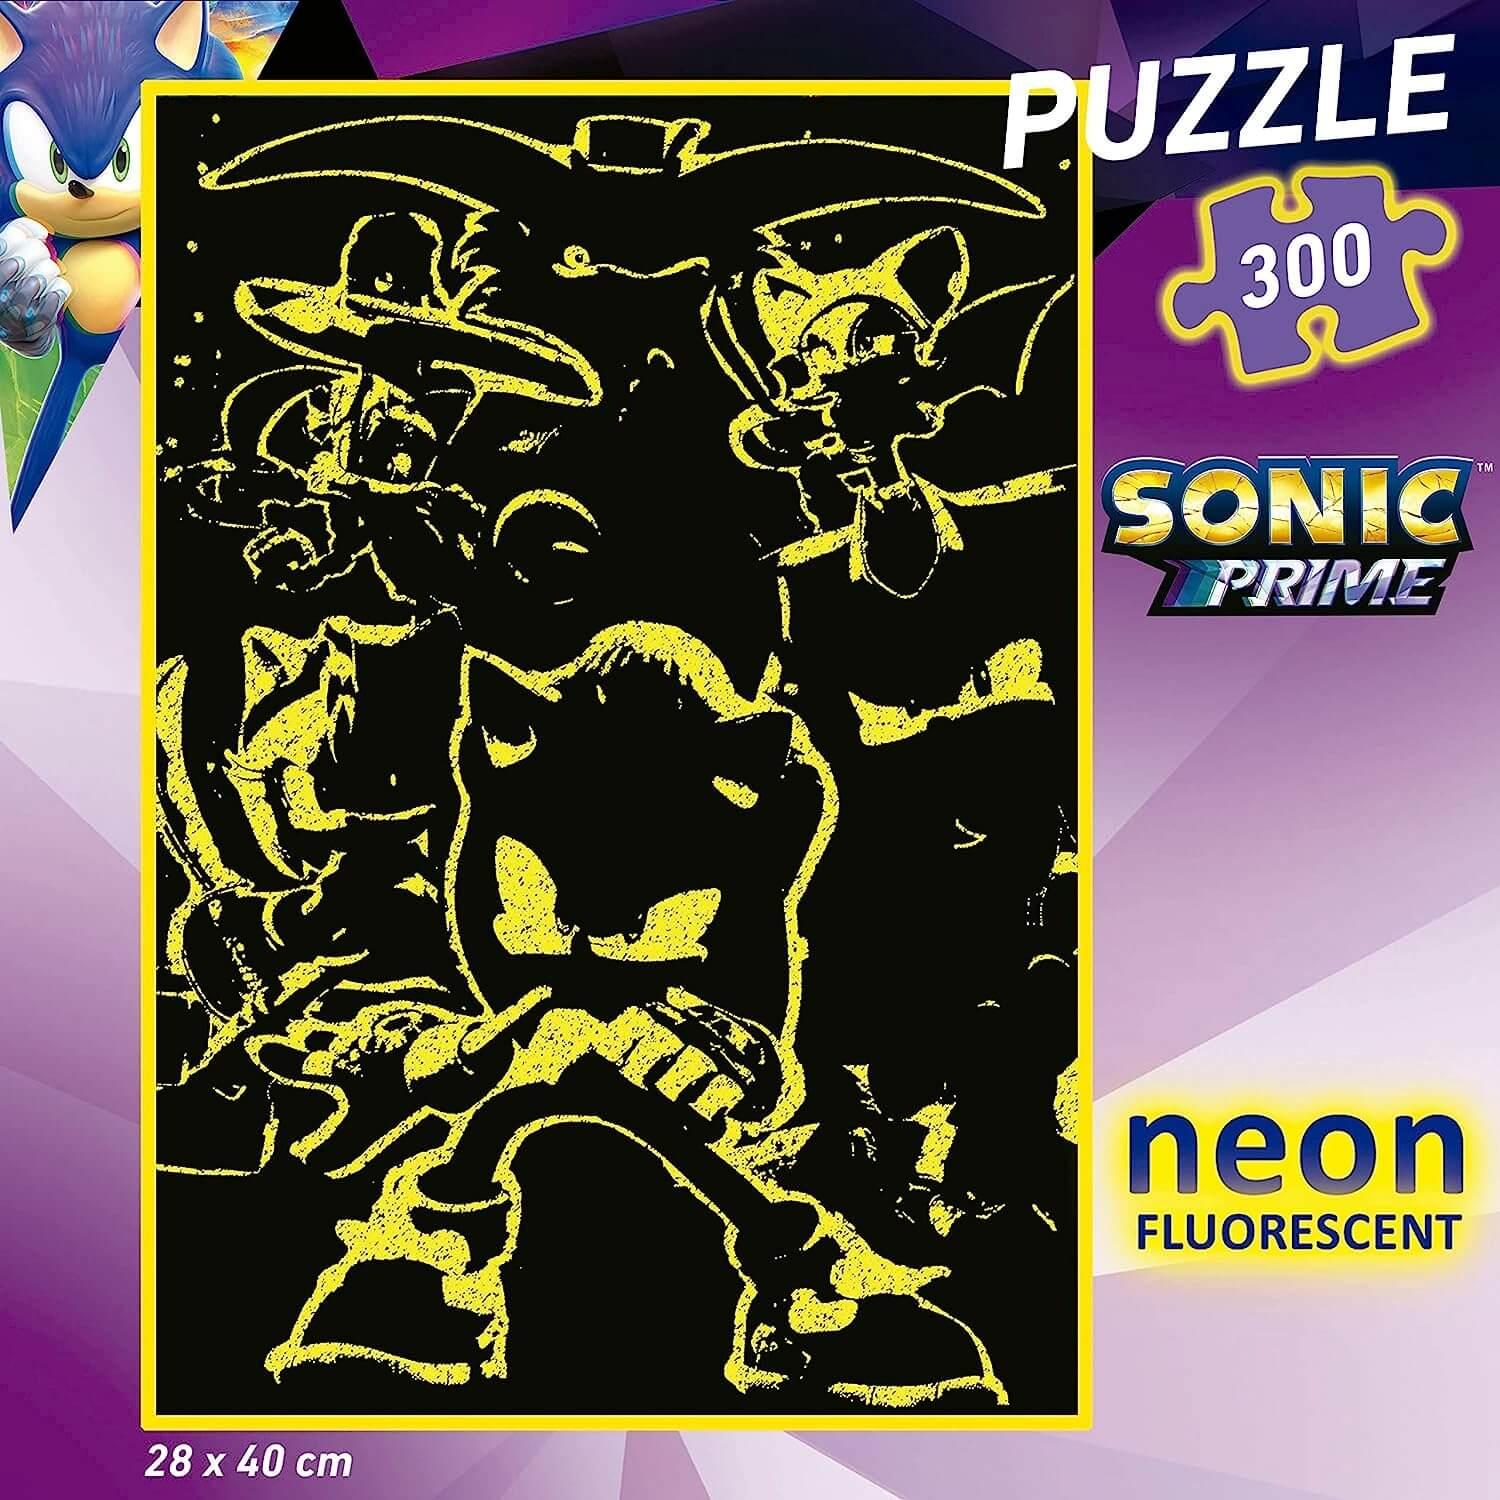 Jigsaw Puzzle Sonic the Hedgehog (300 Pieces)